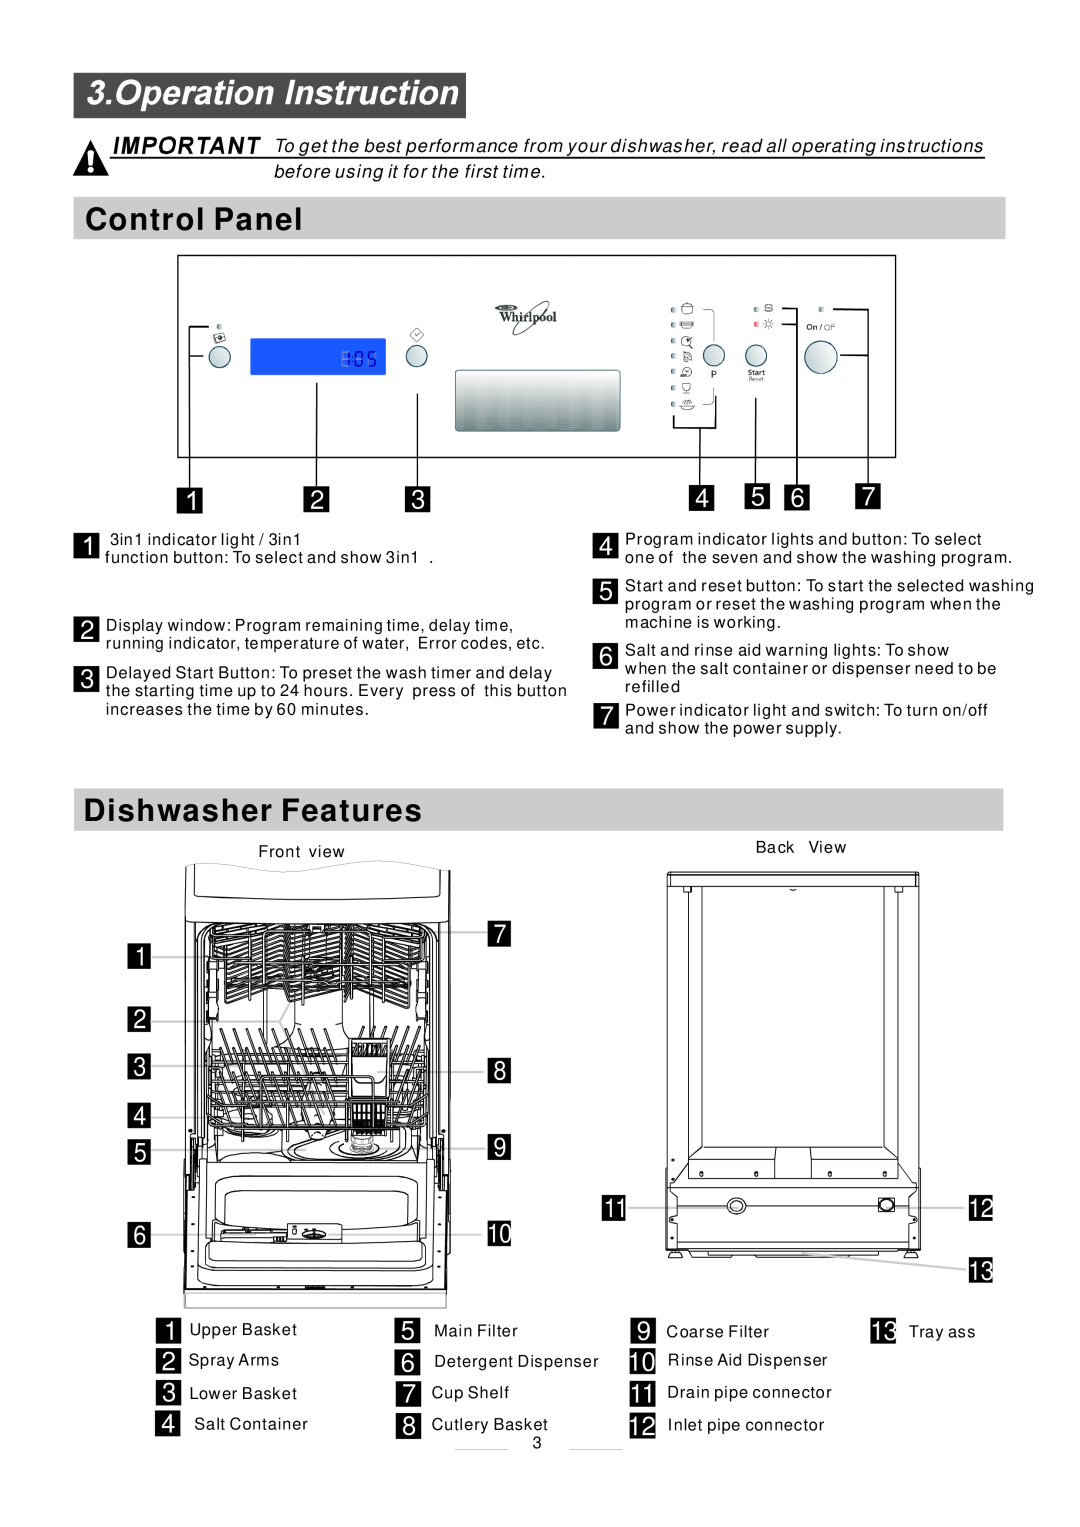 Whirlpool ADP 750 manual Control Panel, Dishwasher Features, before using it for the first time 